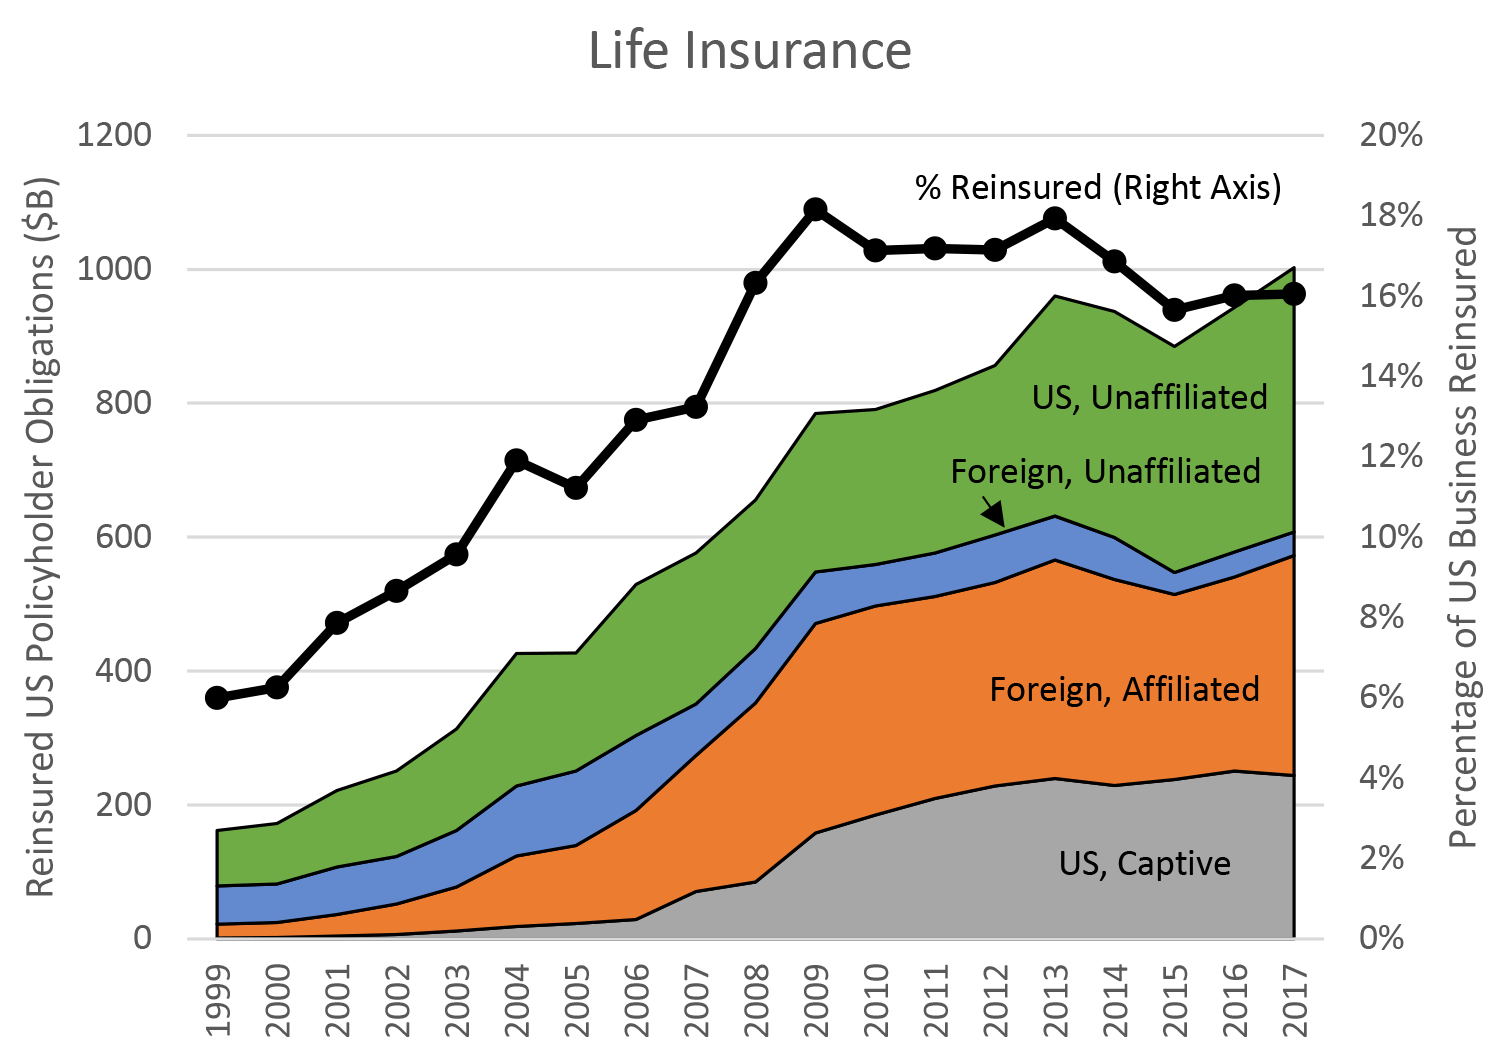 Figure 1. Life Insurance Company Reinsurance on Policies Sold to U.S. Residents. See accessible link for data description.